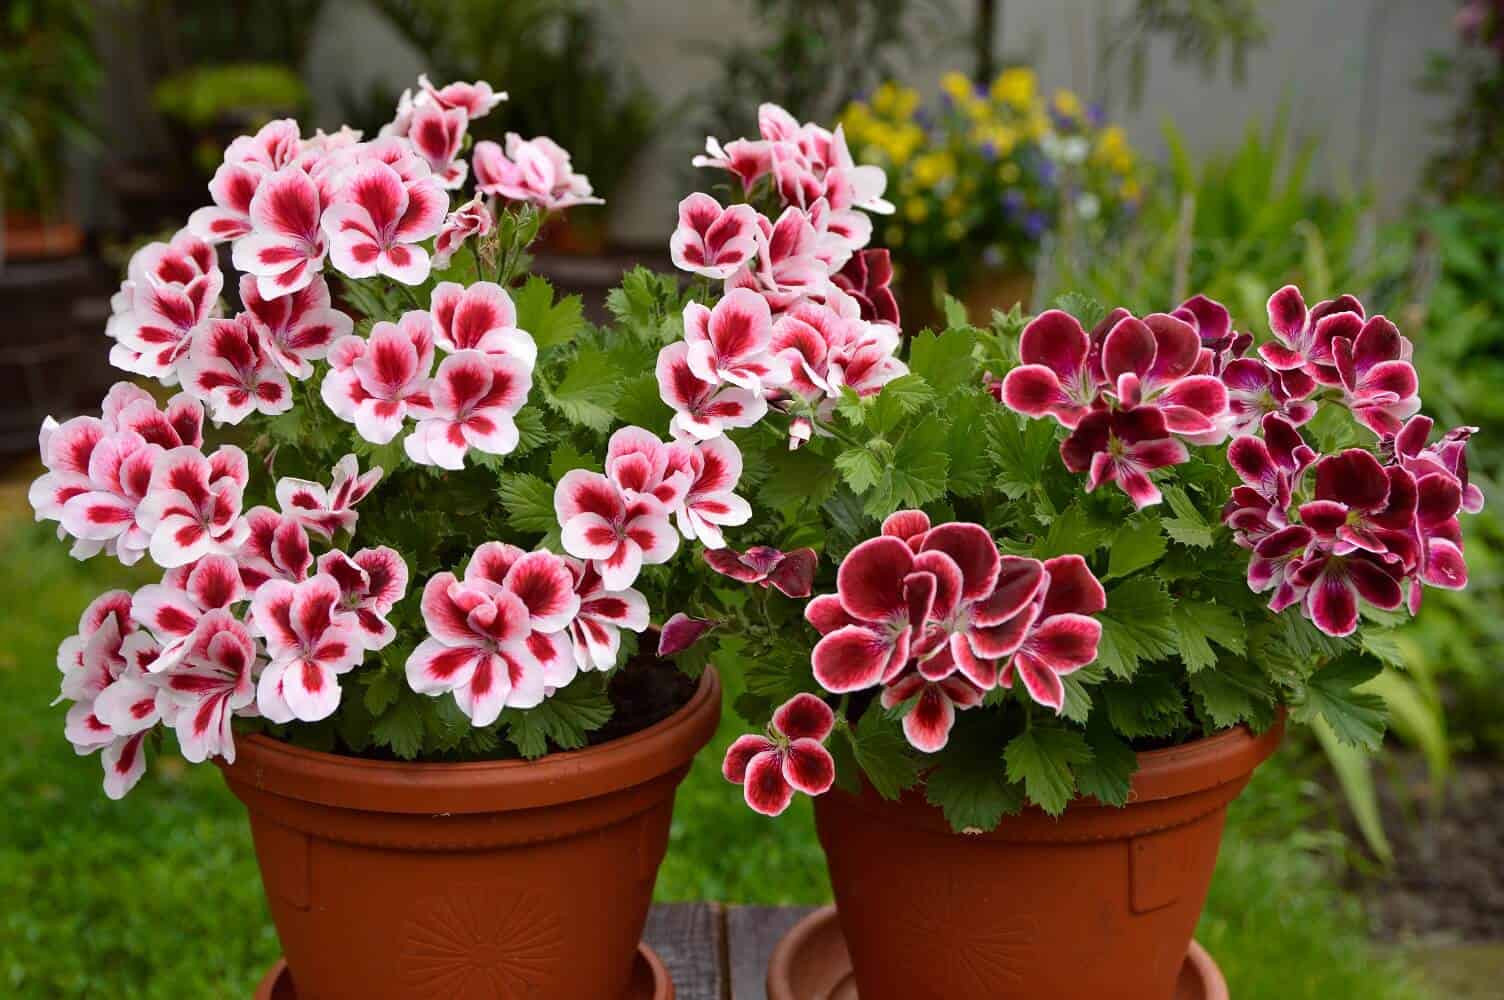 Geranium Care - How to Grow and Care for Geraniums in Pots